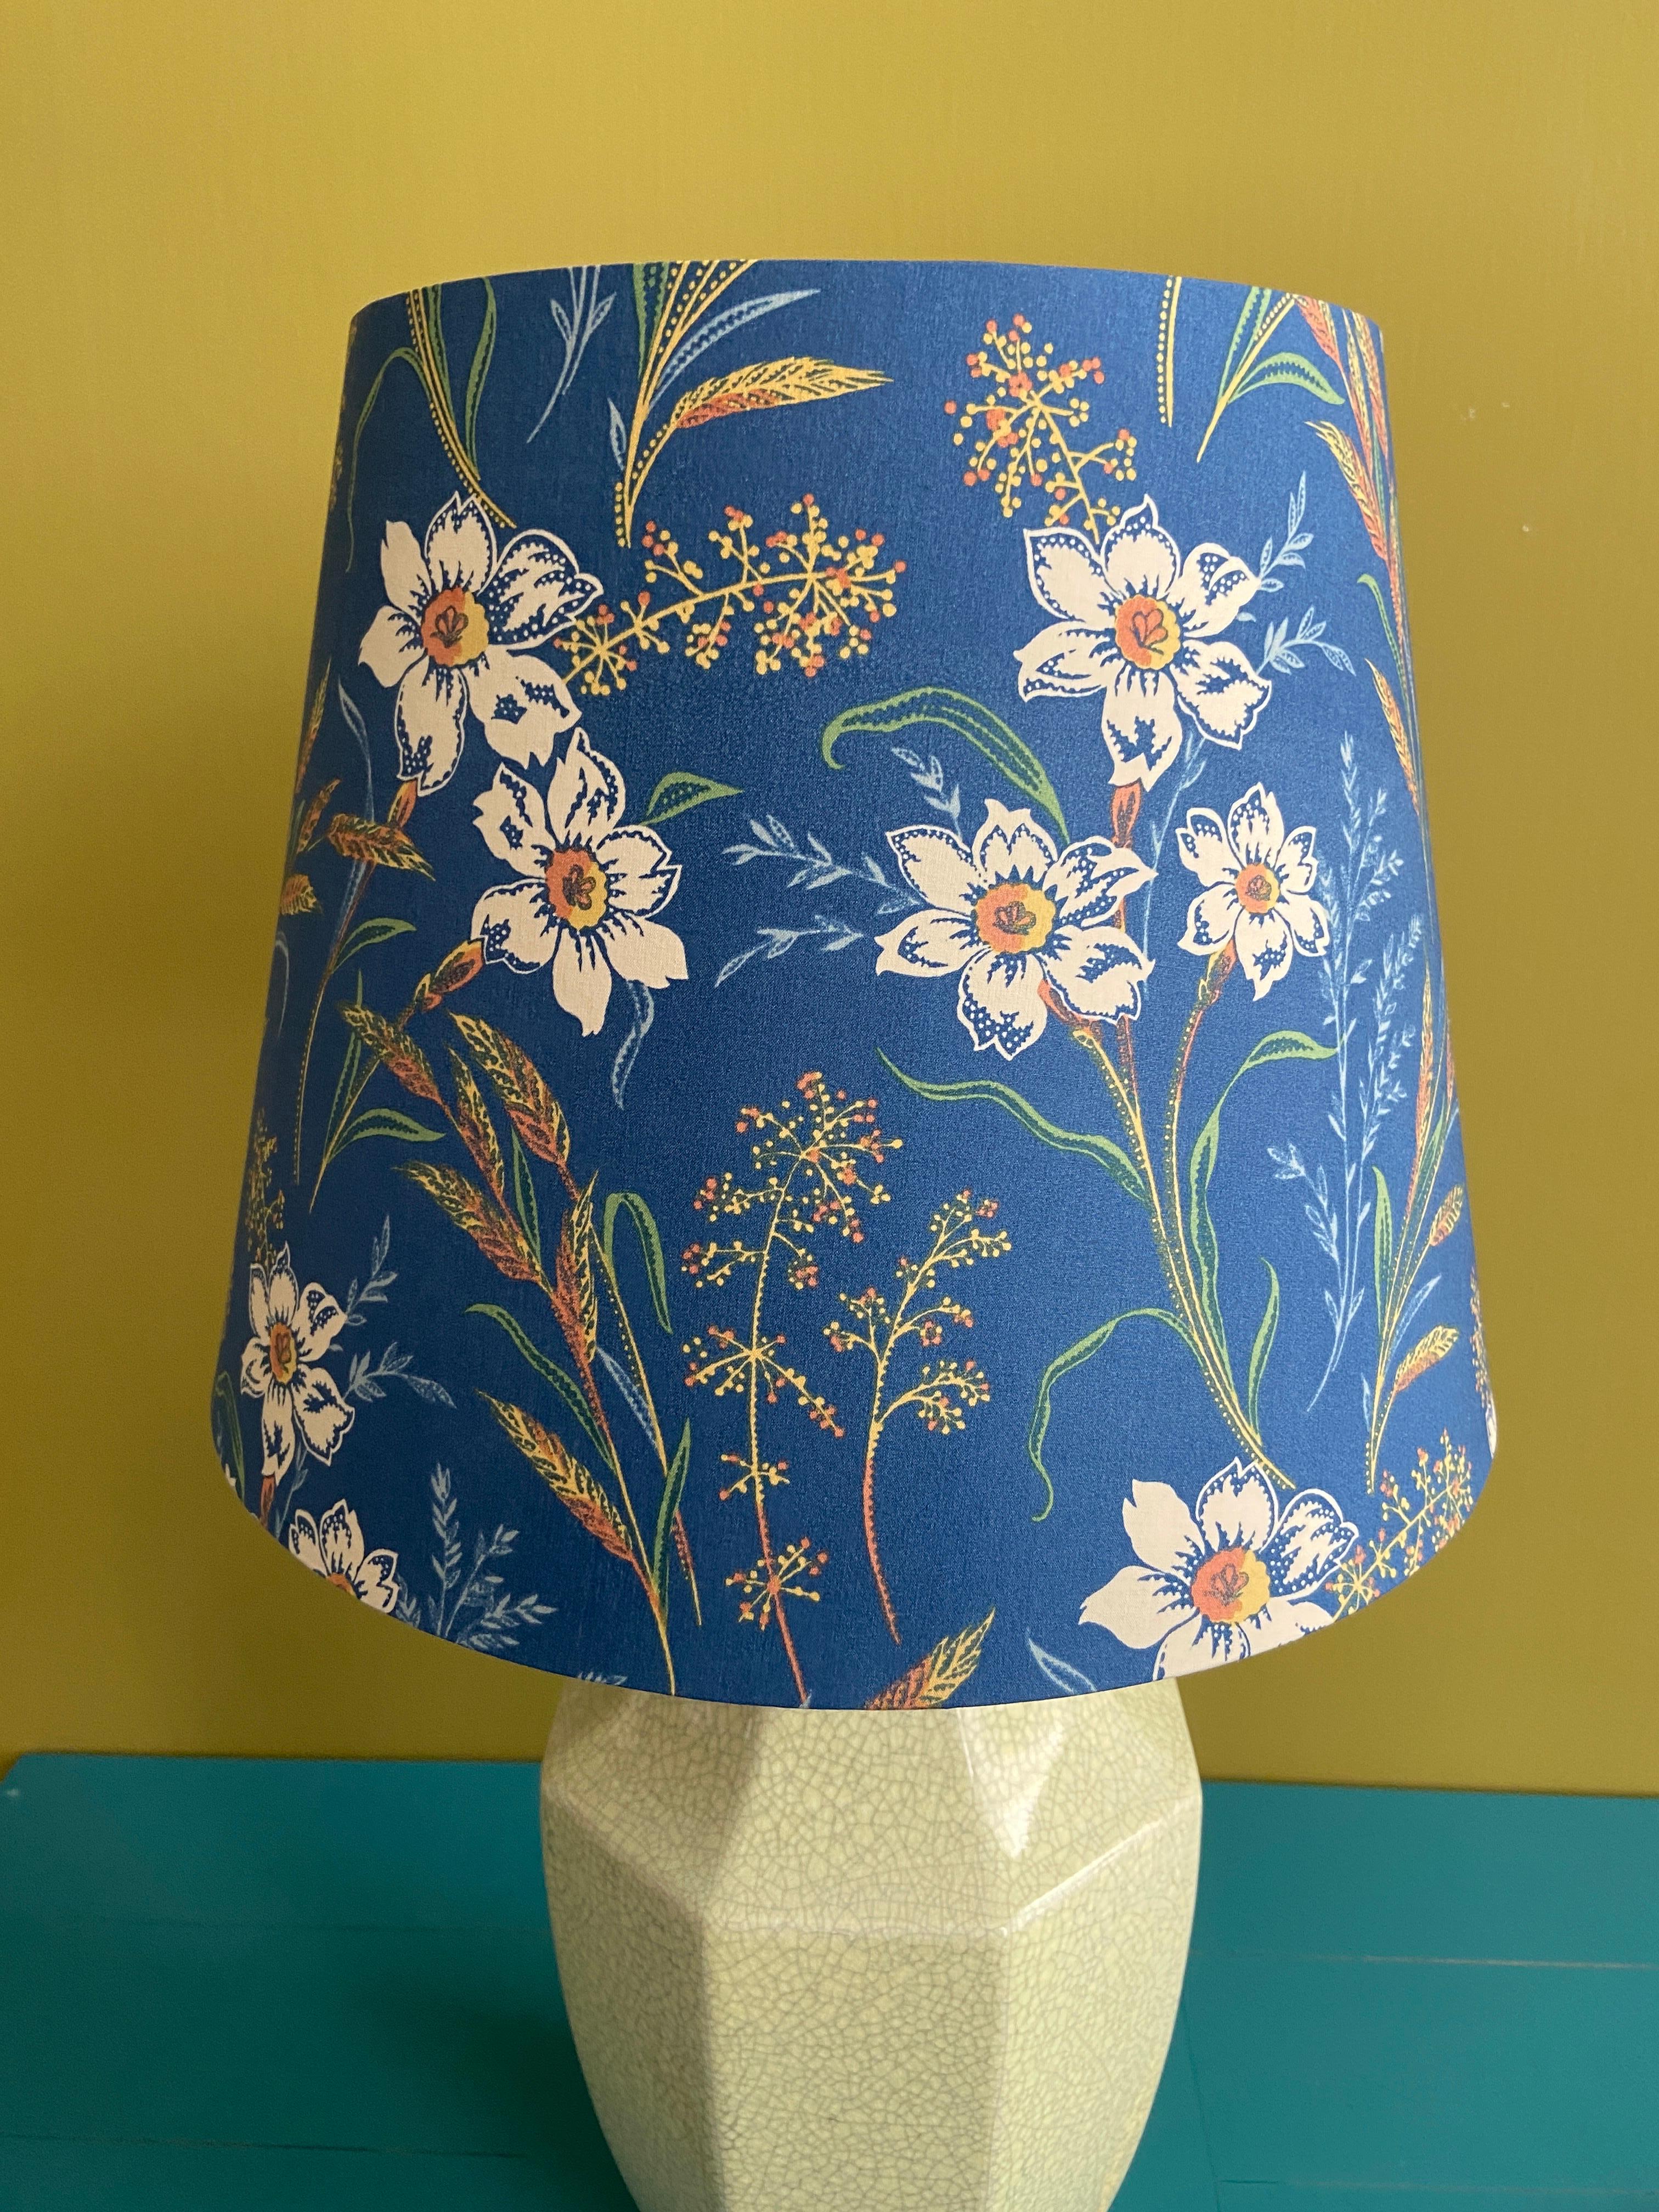 French Vintage Ceramic Table Lamp with Customized Shade, France, 20th Century For Sale